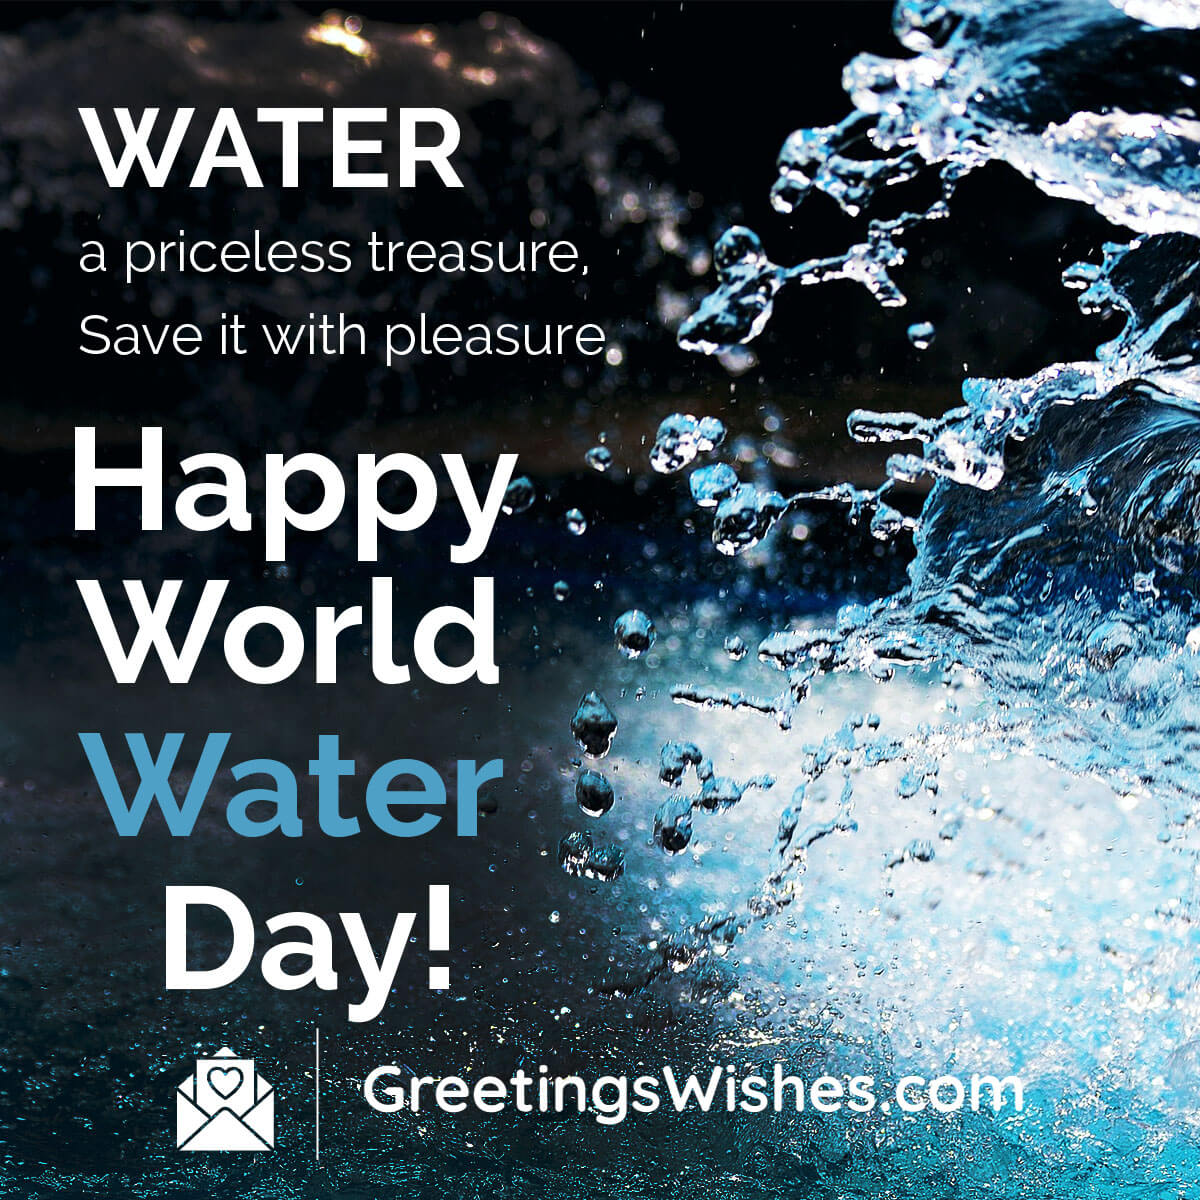 Water Day Greetings